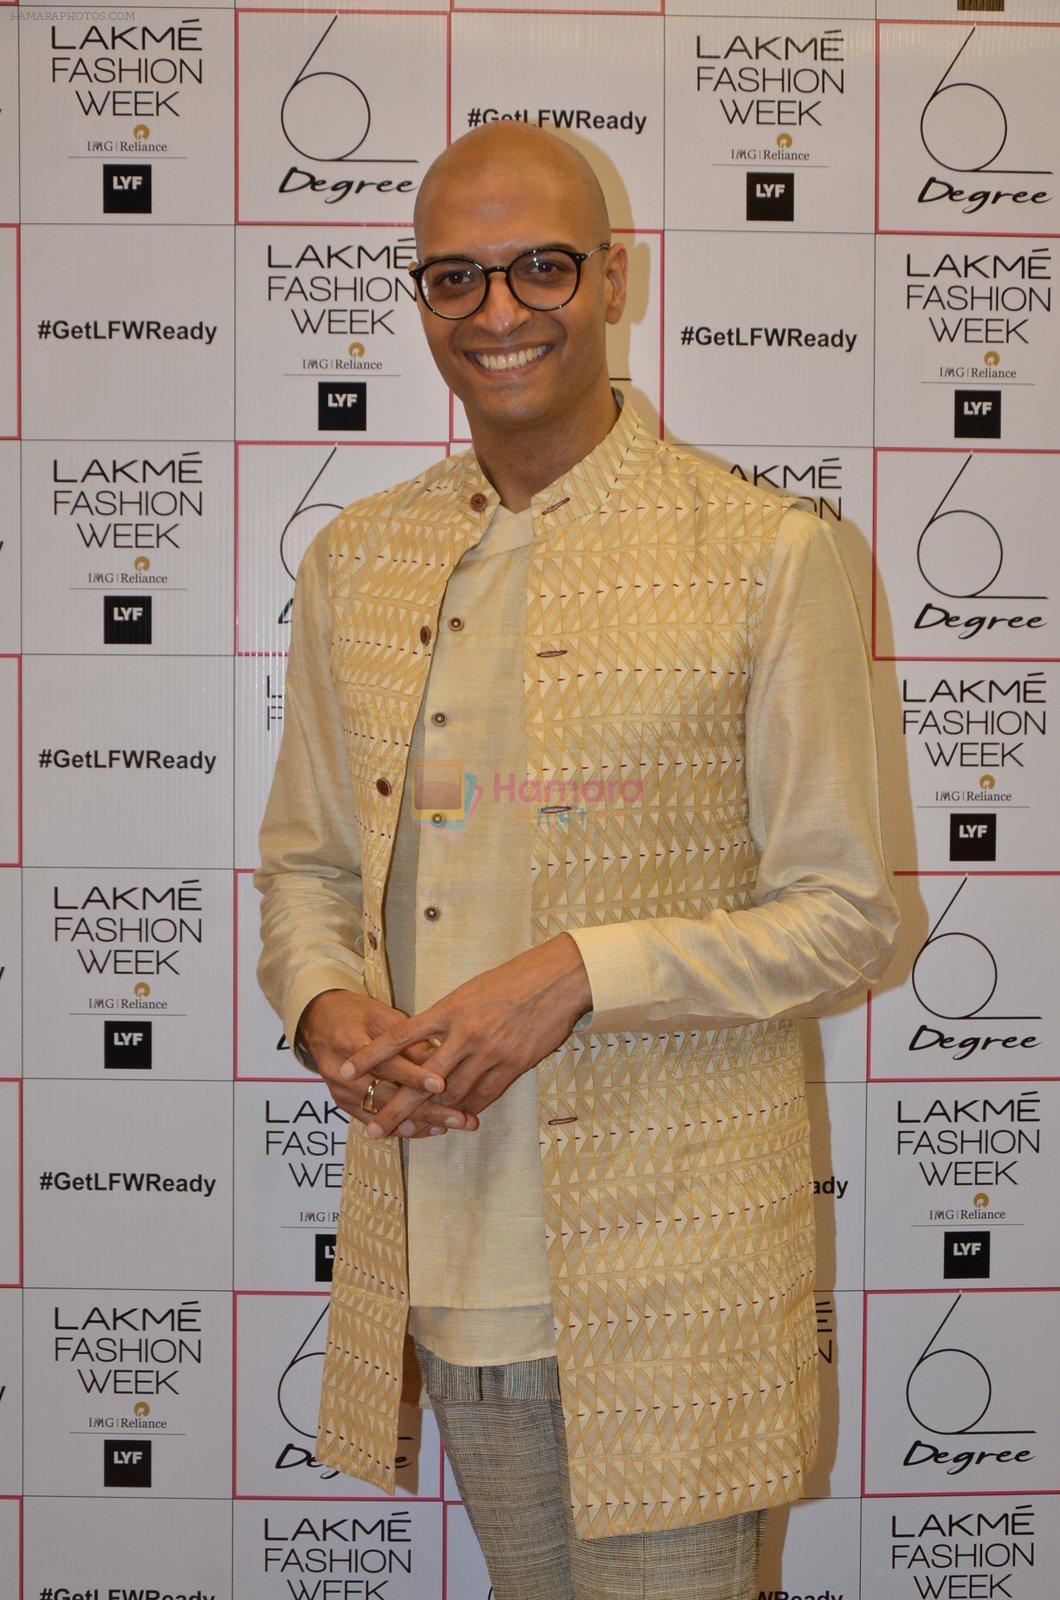 at Lakme fashion week workshop for designers on 26th July 2016